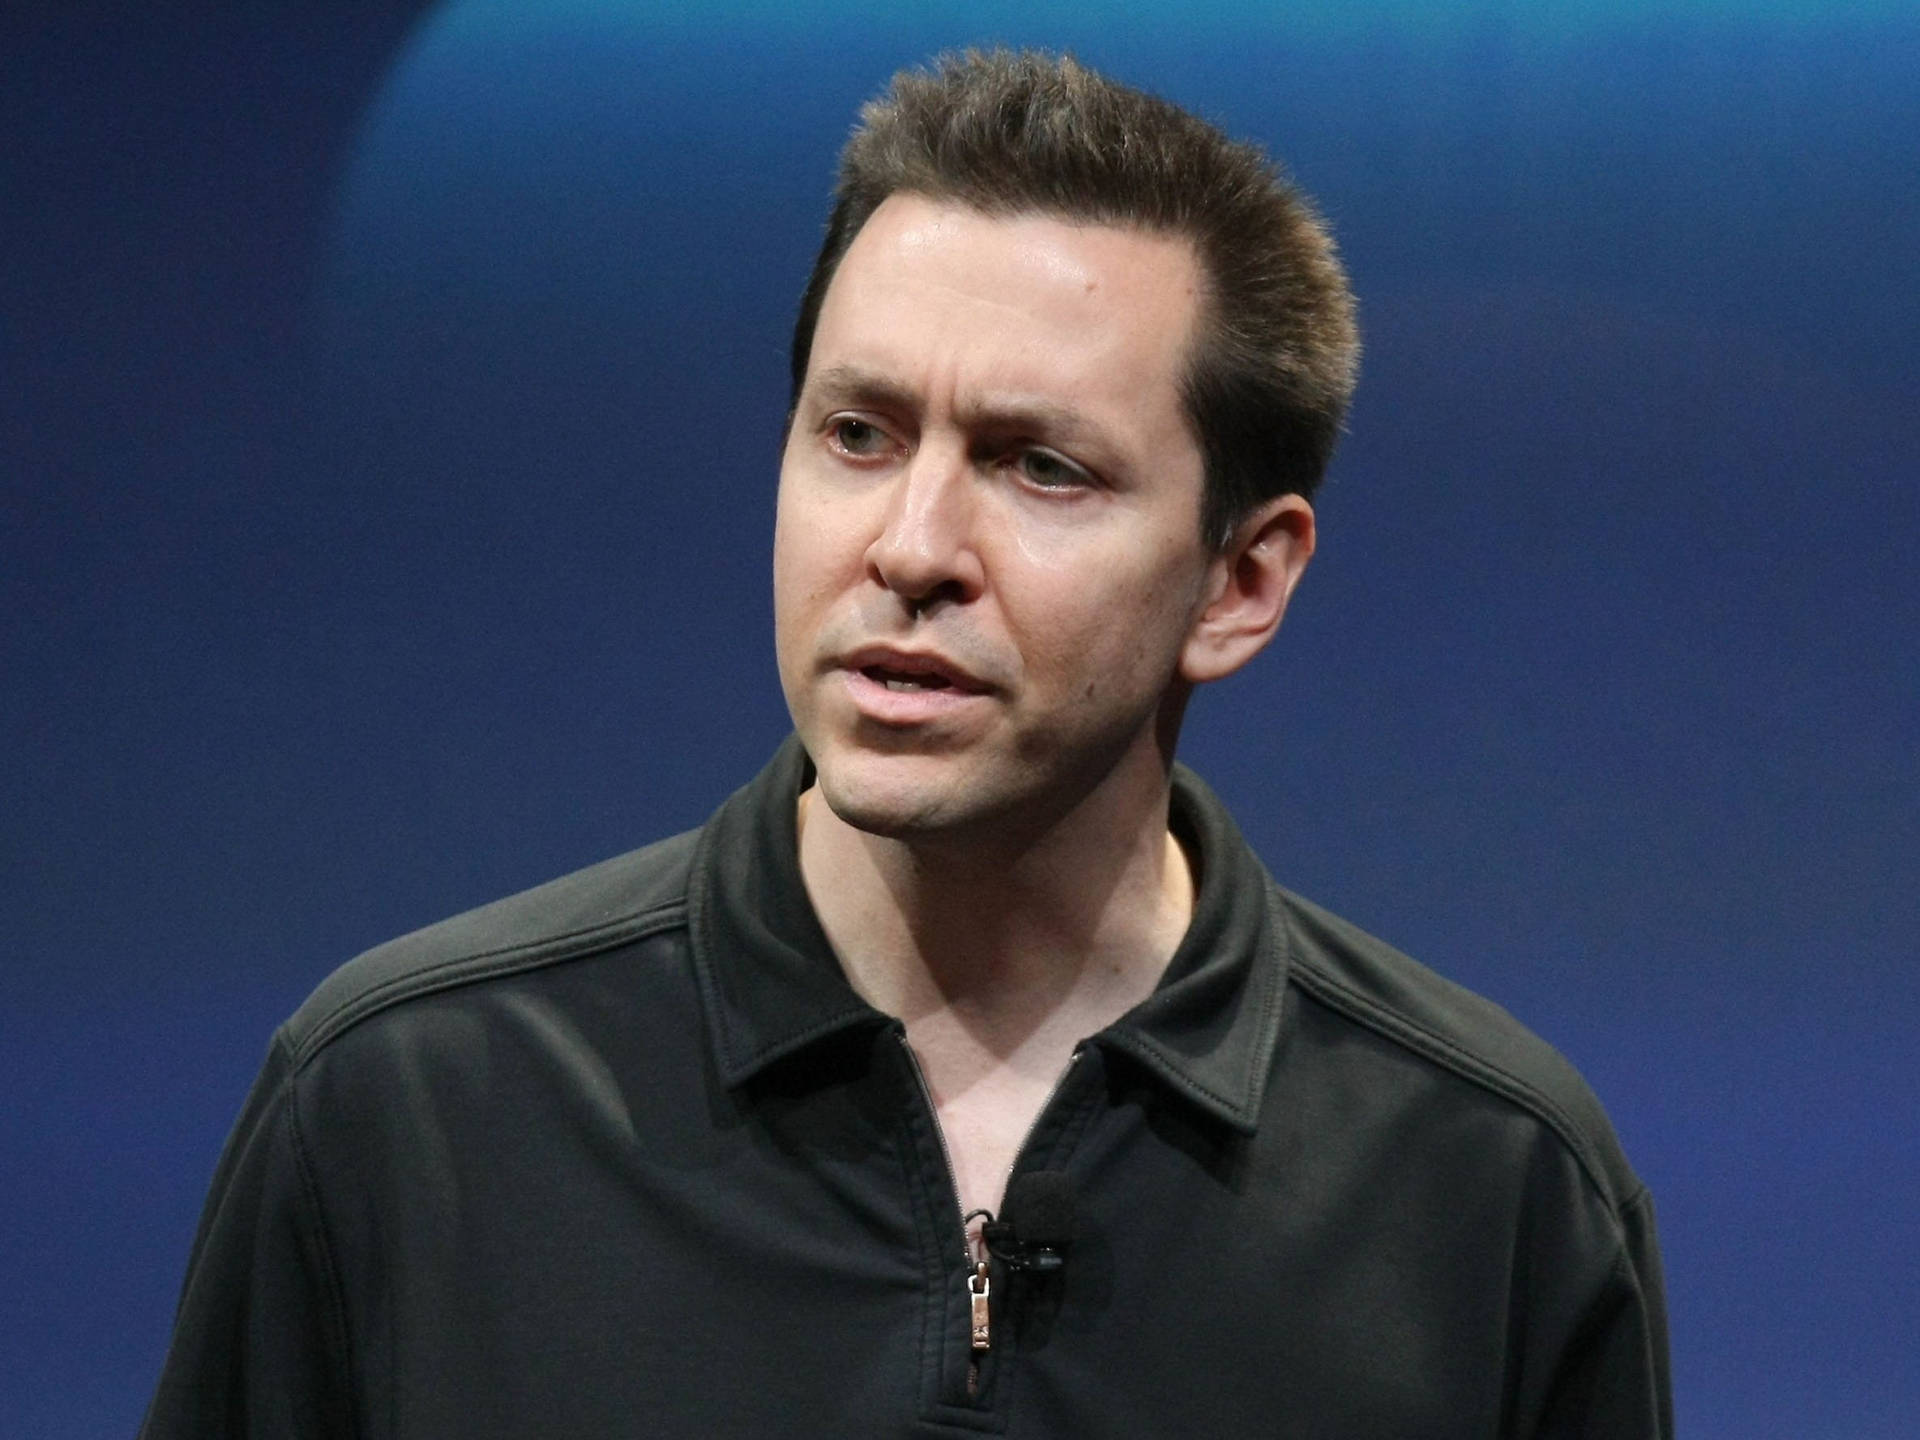 Scott Forstall Looking Thoughtful In A Presentation Wallpaper